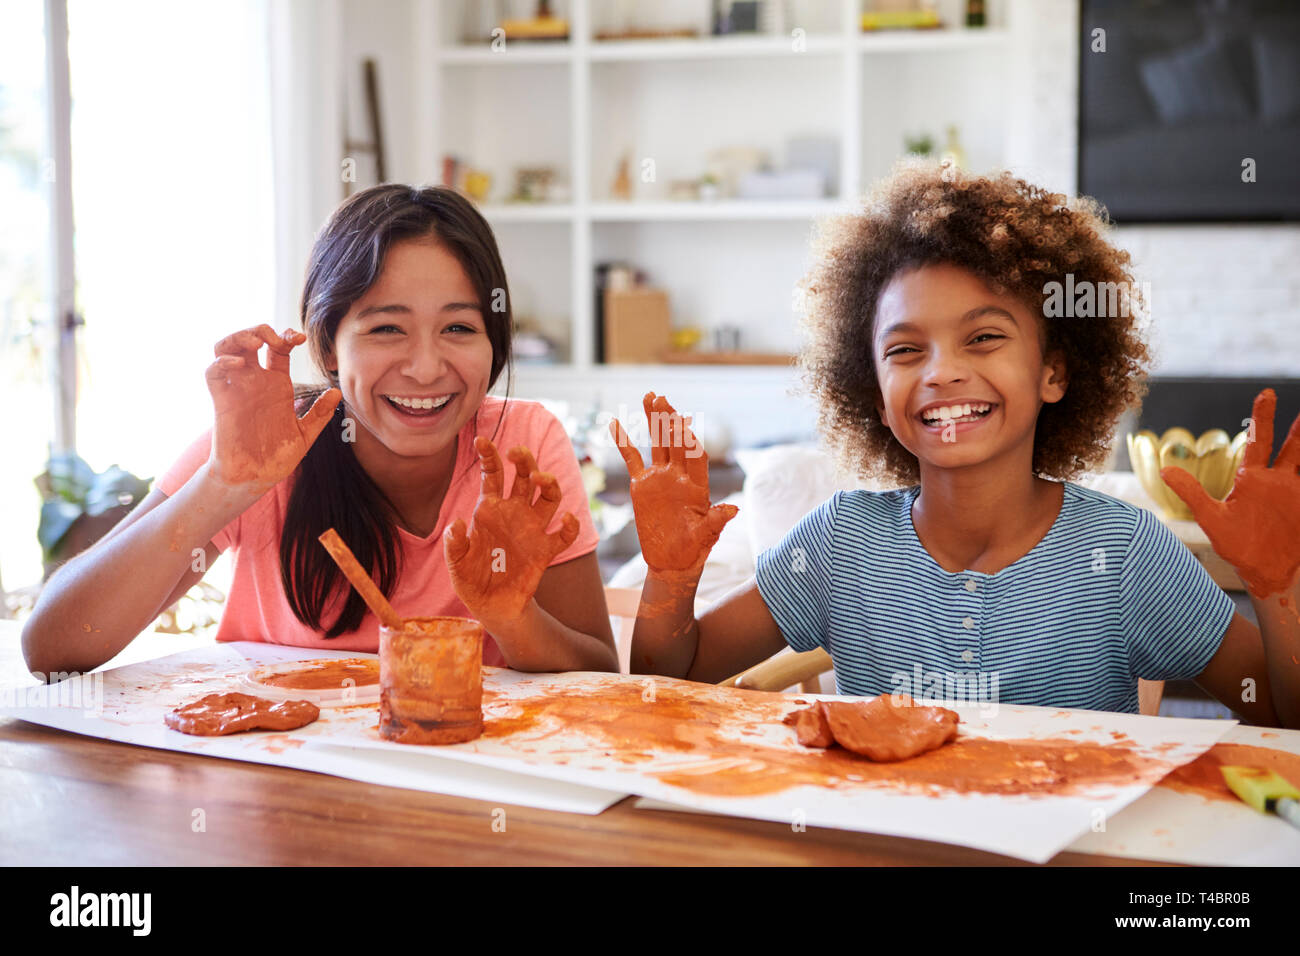 Two girlfriends having fun playing with modelling clay at home, smiling and showing dirty hands to camera, front view, close up Stock Photo